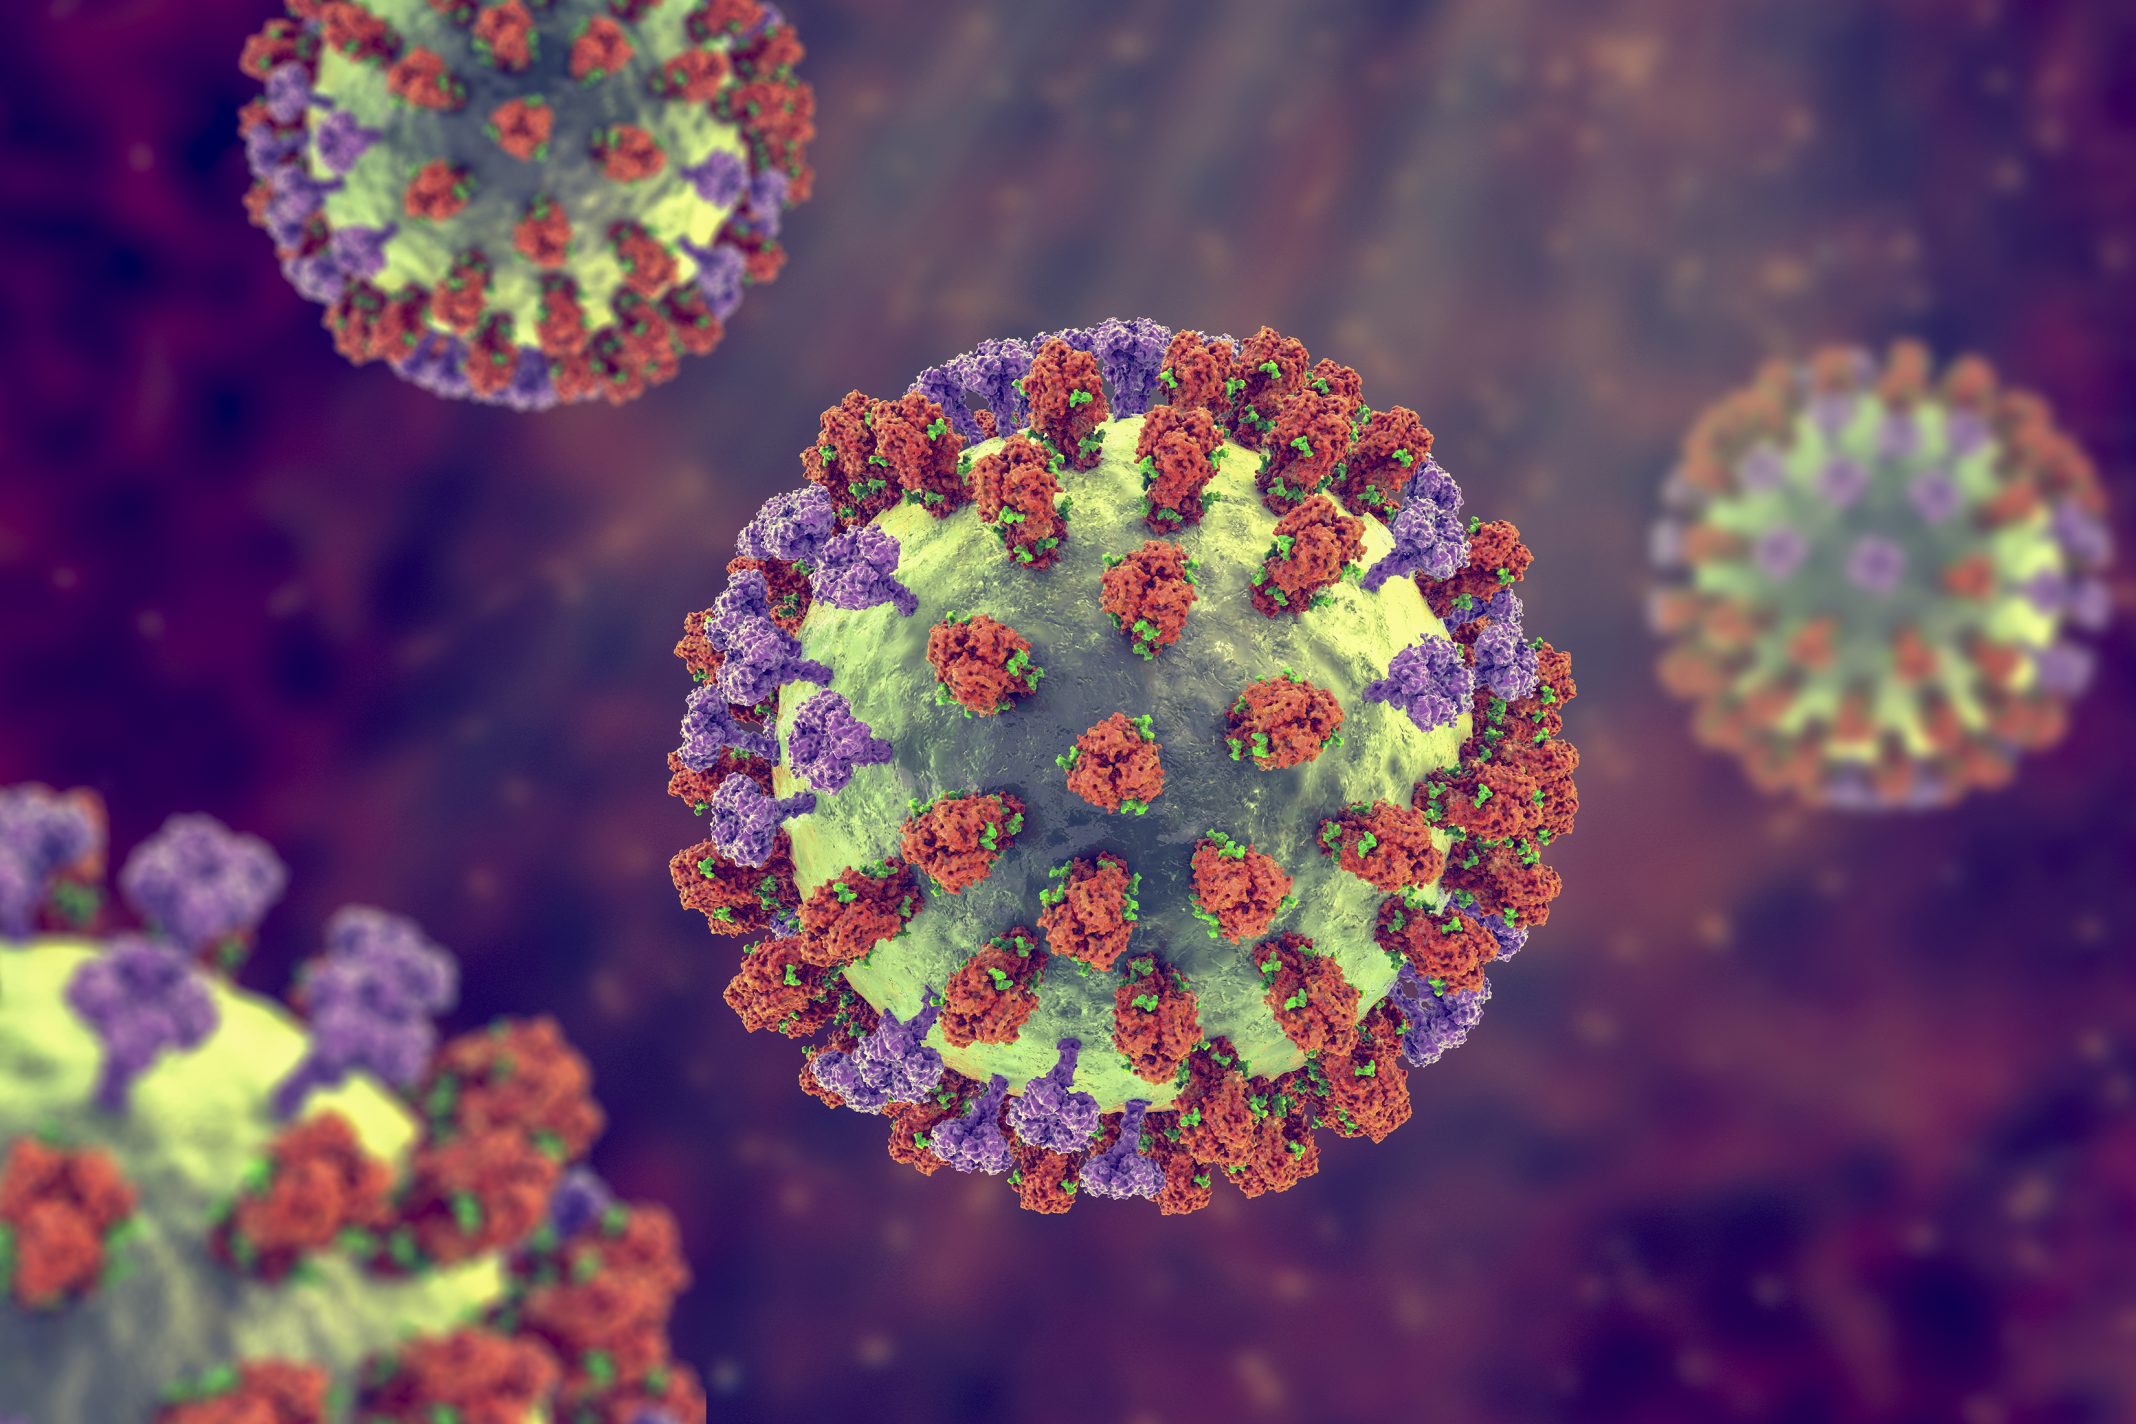 mRNA Vaccine Provides Broad Protection against All Known Influenza Subtypes